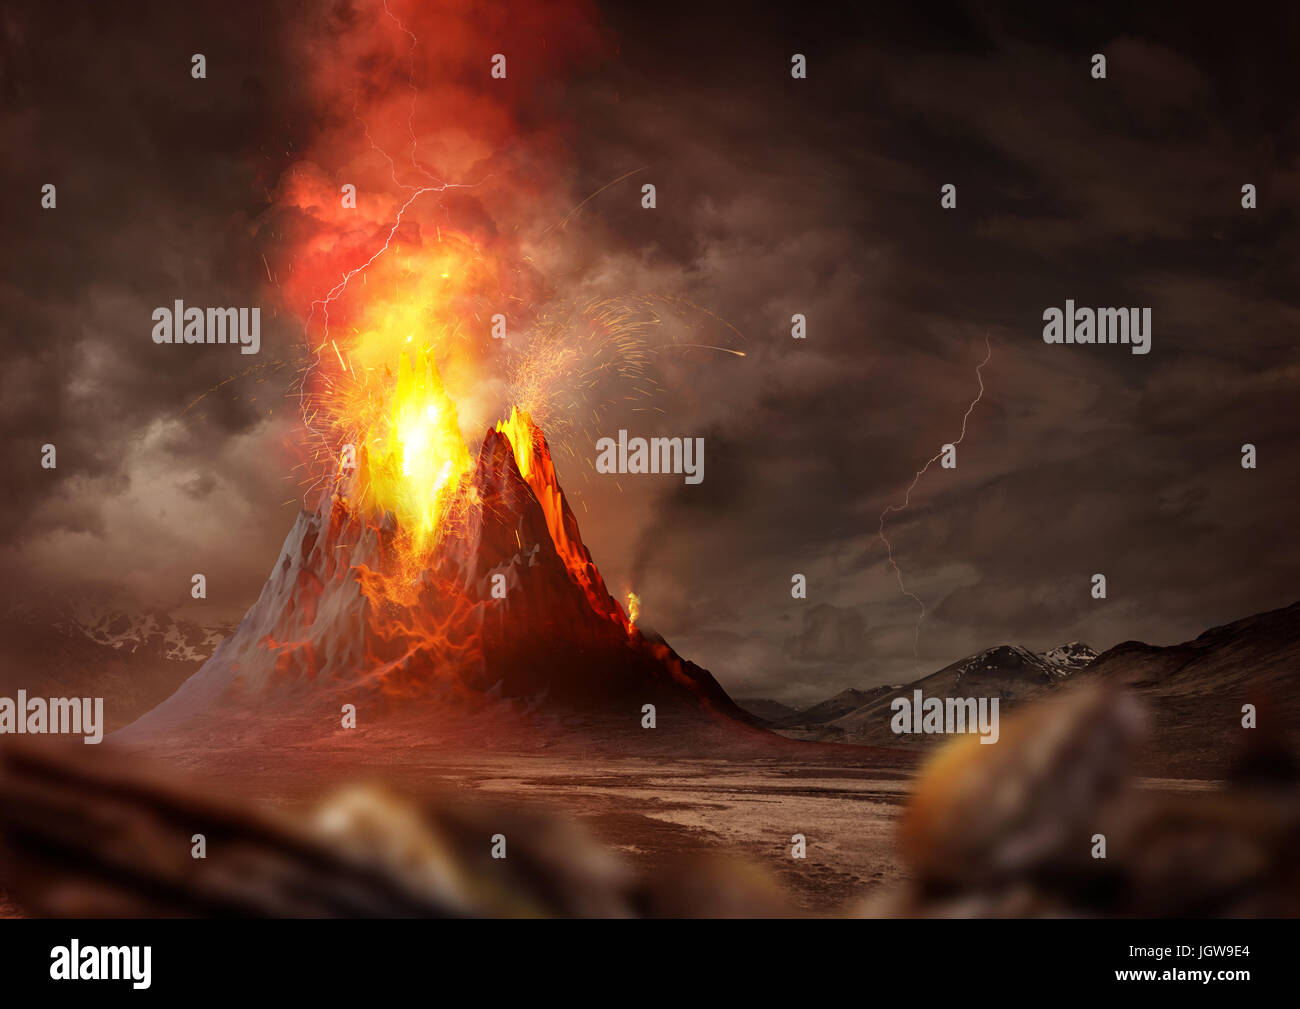 Massive Volcano Eruption. A large volcano erupting hot lava and gases into the atmosphere. 3D Illustration. Stock Photo